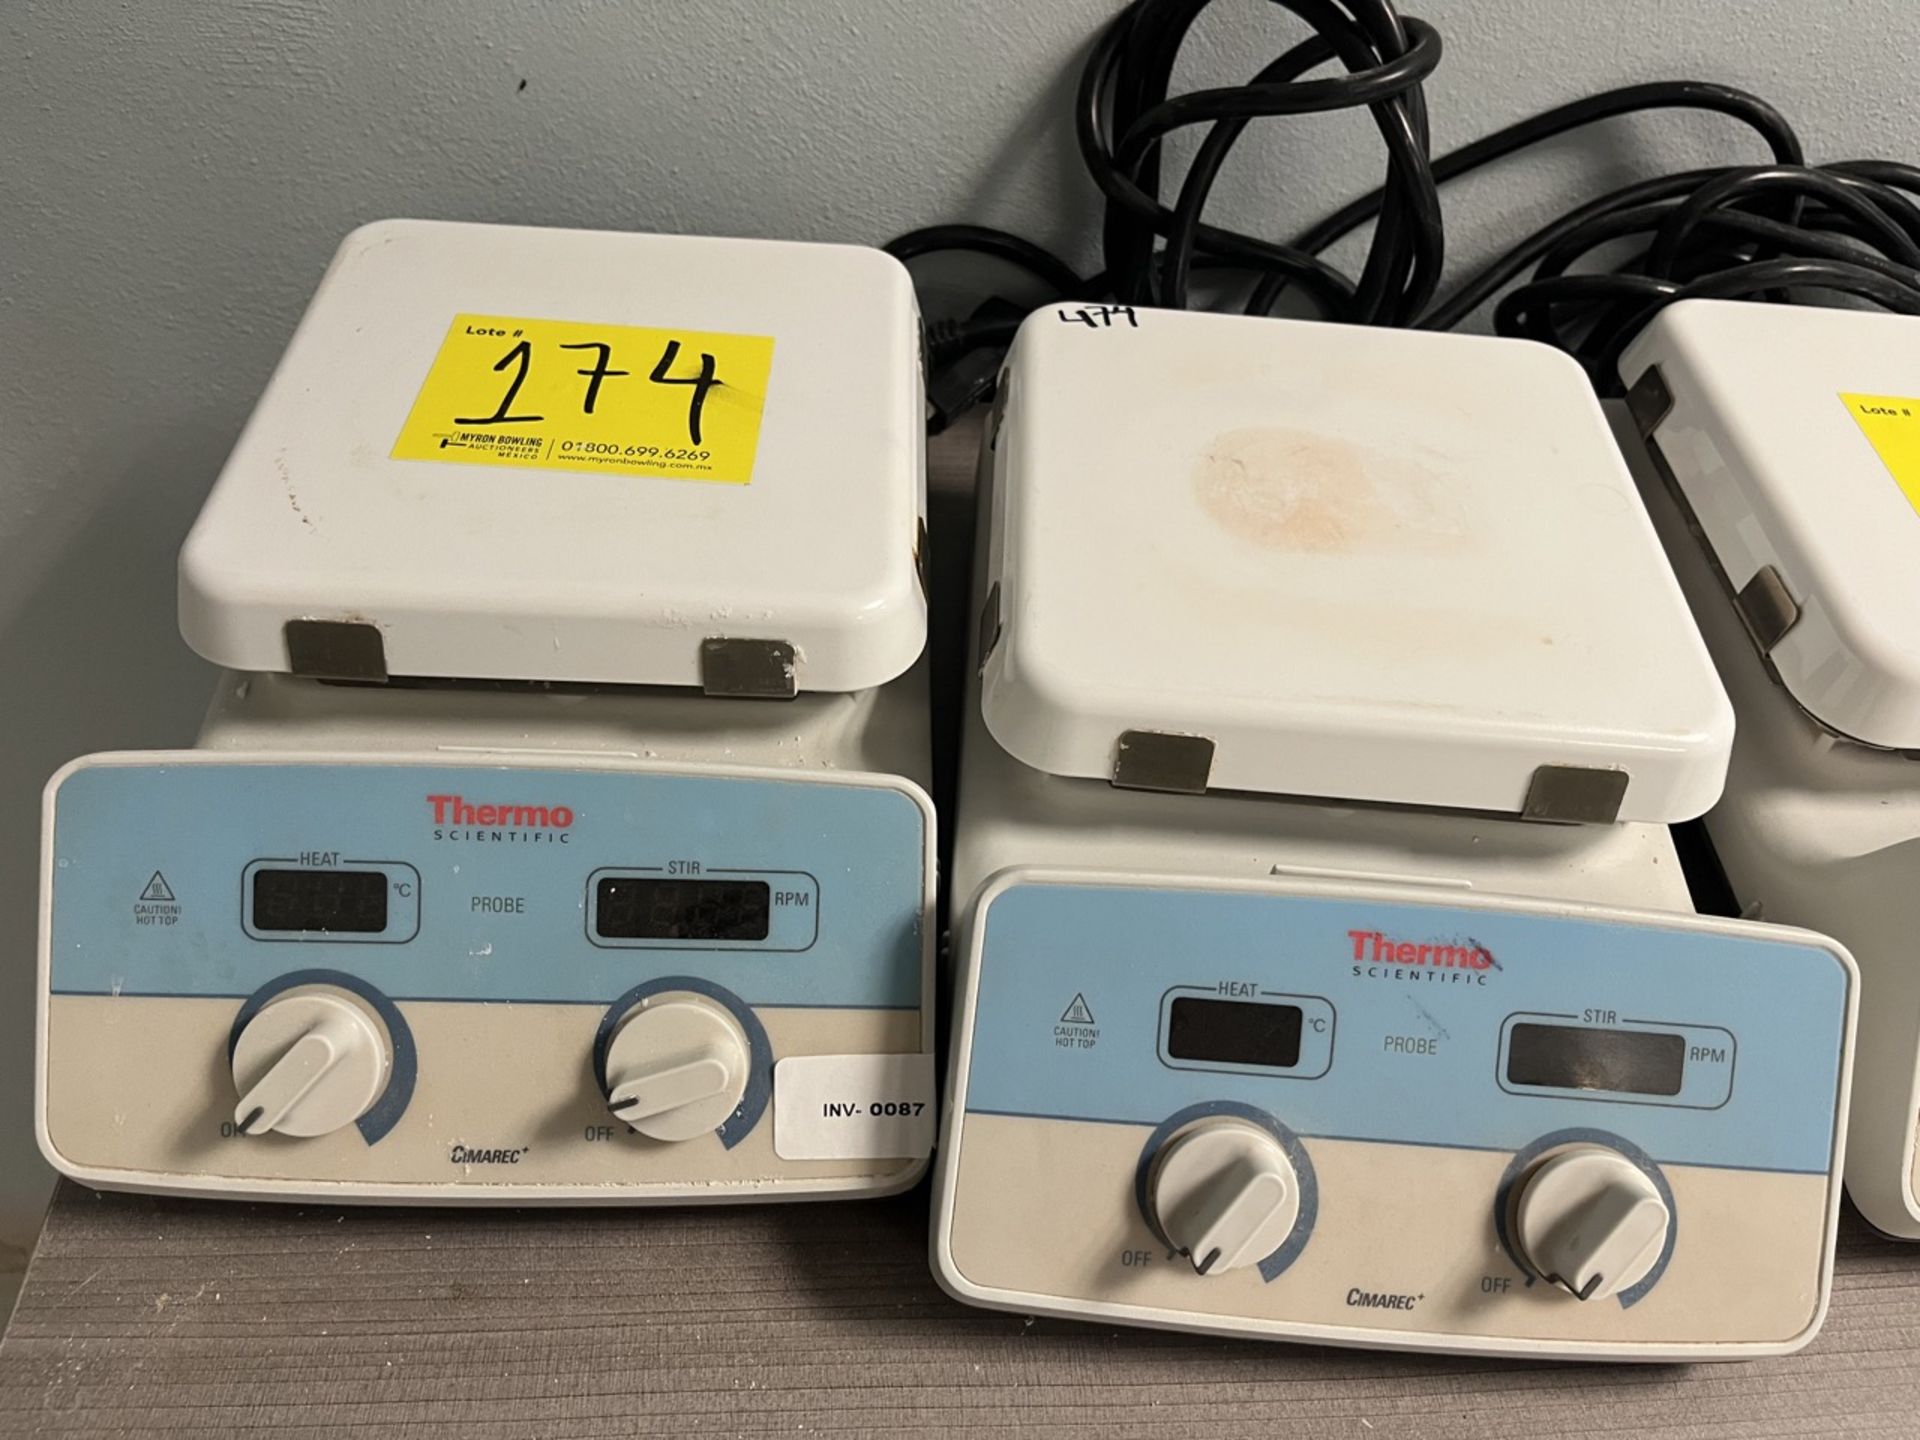 Lot of 2 Thermo Scientific Heating Plate Shaker, Model SP88857100, Series 776022, 853810. / Lote de